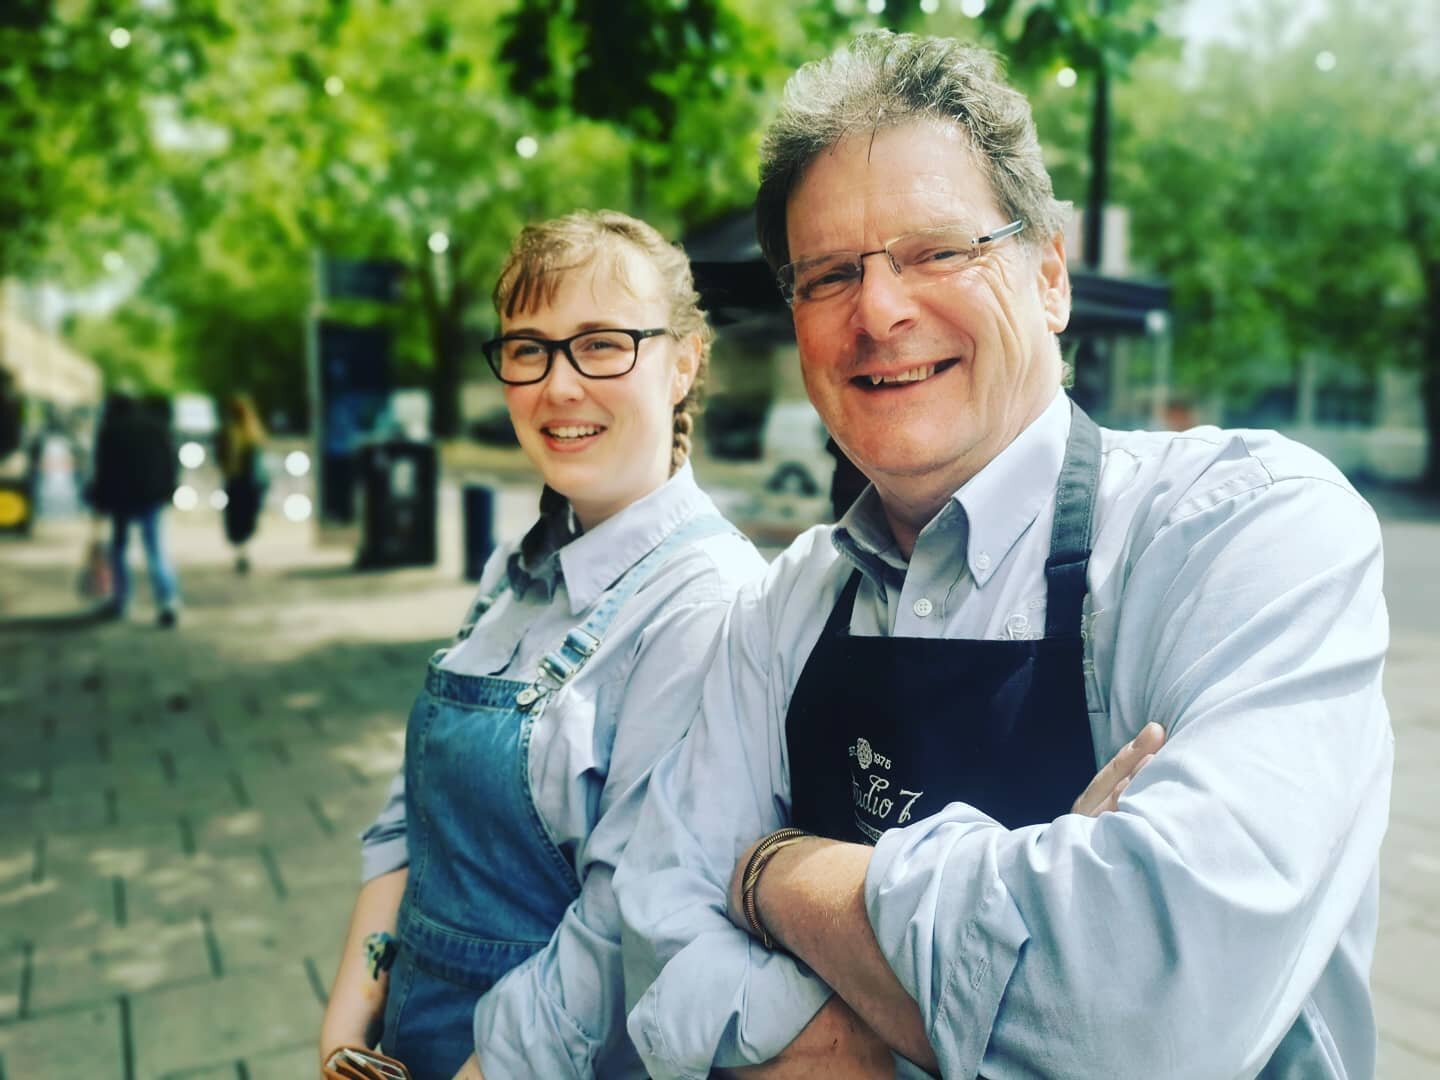 Meet two of our expert repairers, Tegan and Richard. With a combined total of 50 years experience, you can rest assured your instrument is in the best hands. 

#musicrepairshop #instrumentrepair #woodwind #brass #bristol #stnicholasmarket #repairer #